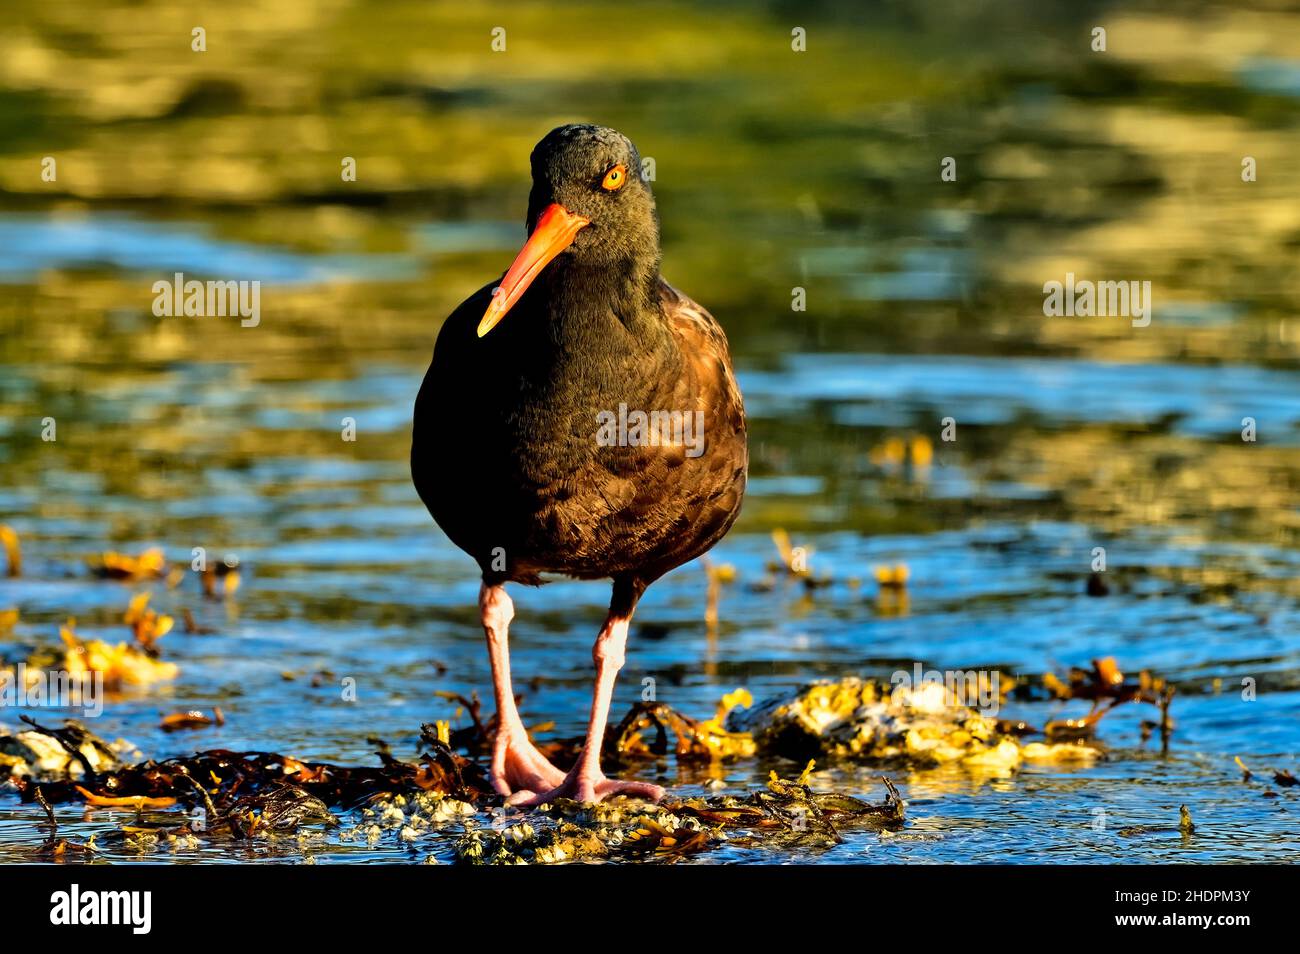 A Black Oystercatcher shorebird (Haematopus bachmani)  in the early morning light foraging in a wild oyster bed on the shore of Vancouver Island Briti Stock Photo